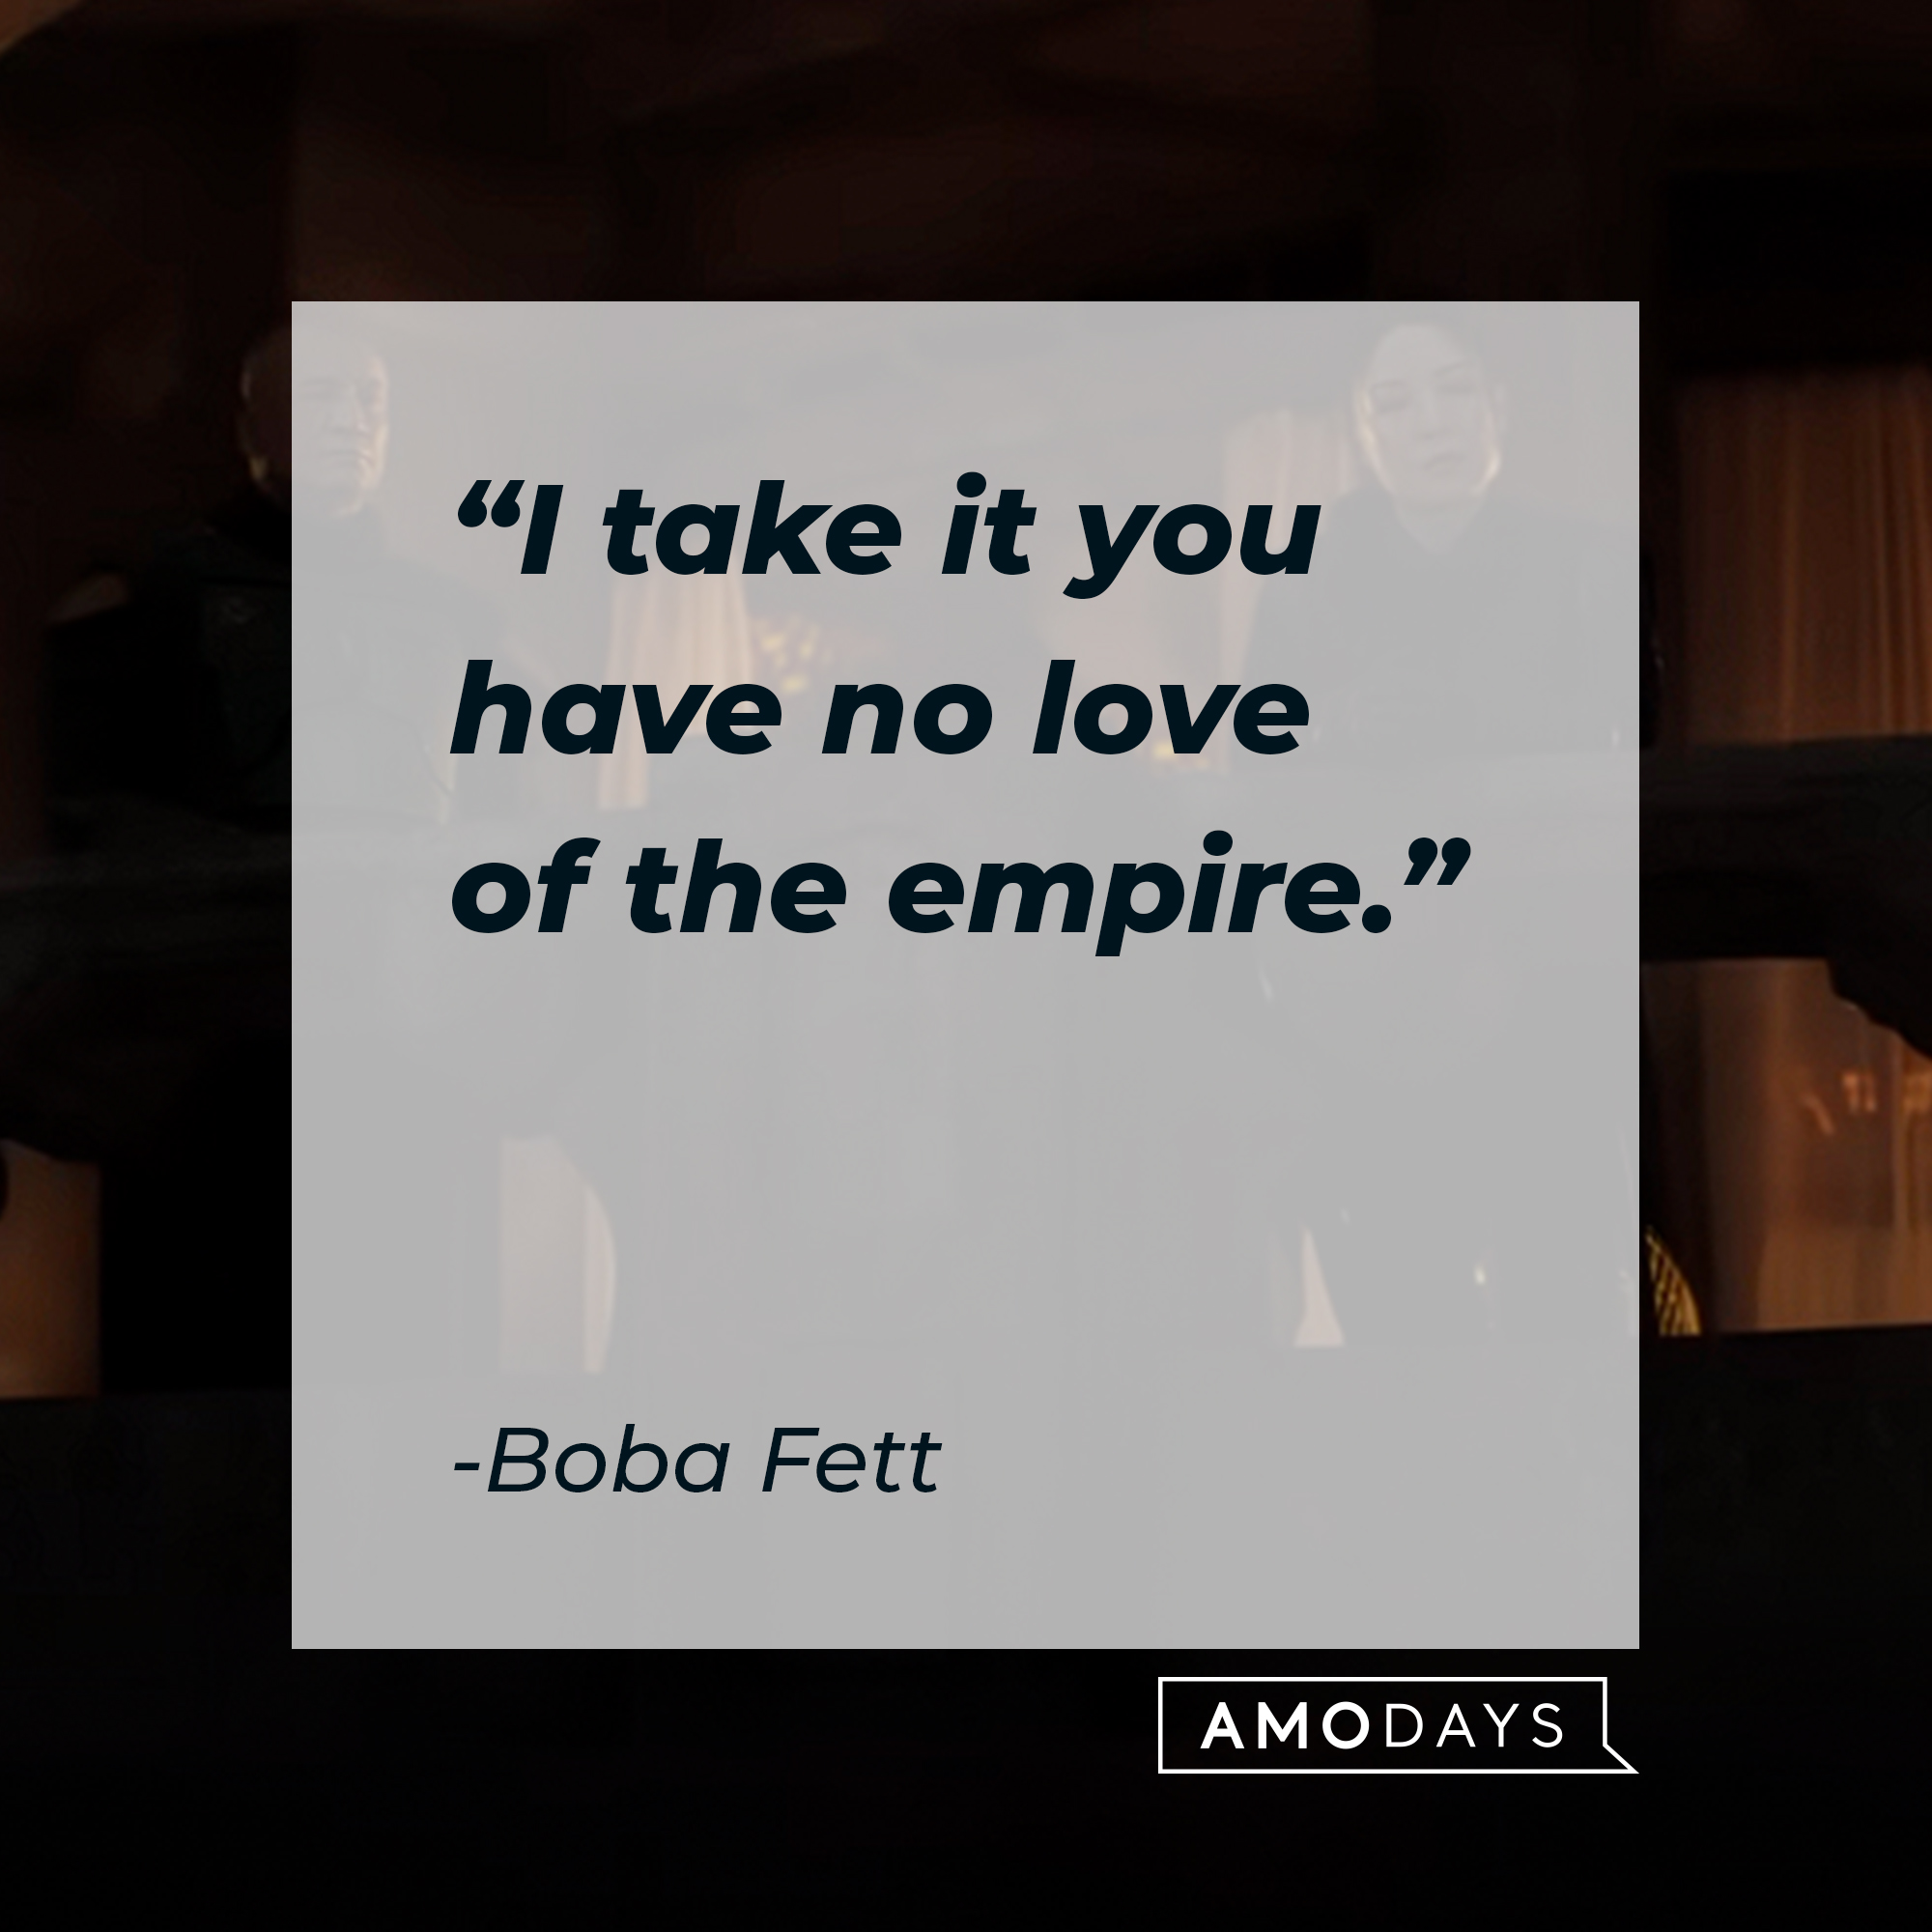 Boba Fett, with his quote: "I take it you have no love of the empire.” │ Source: youtube.com/StarWars